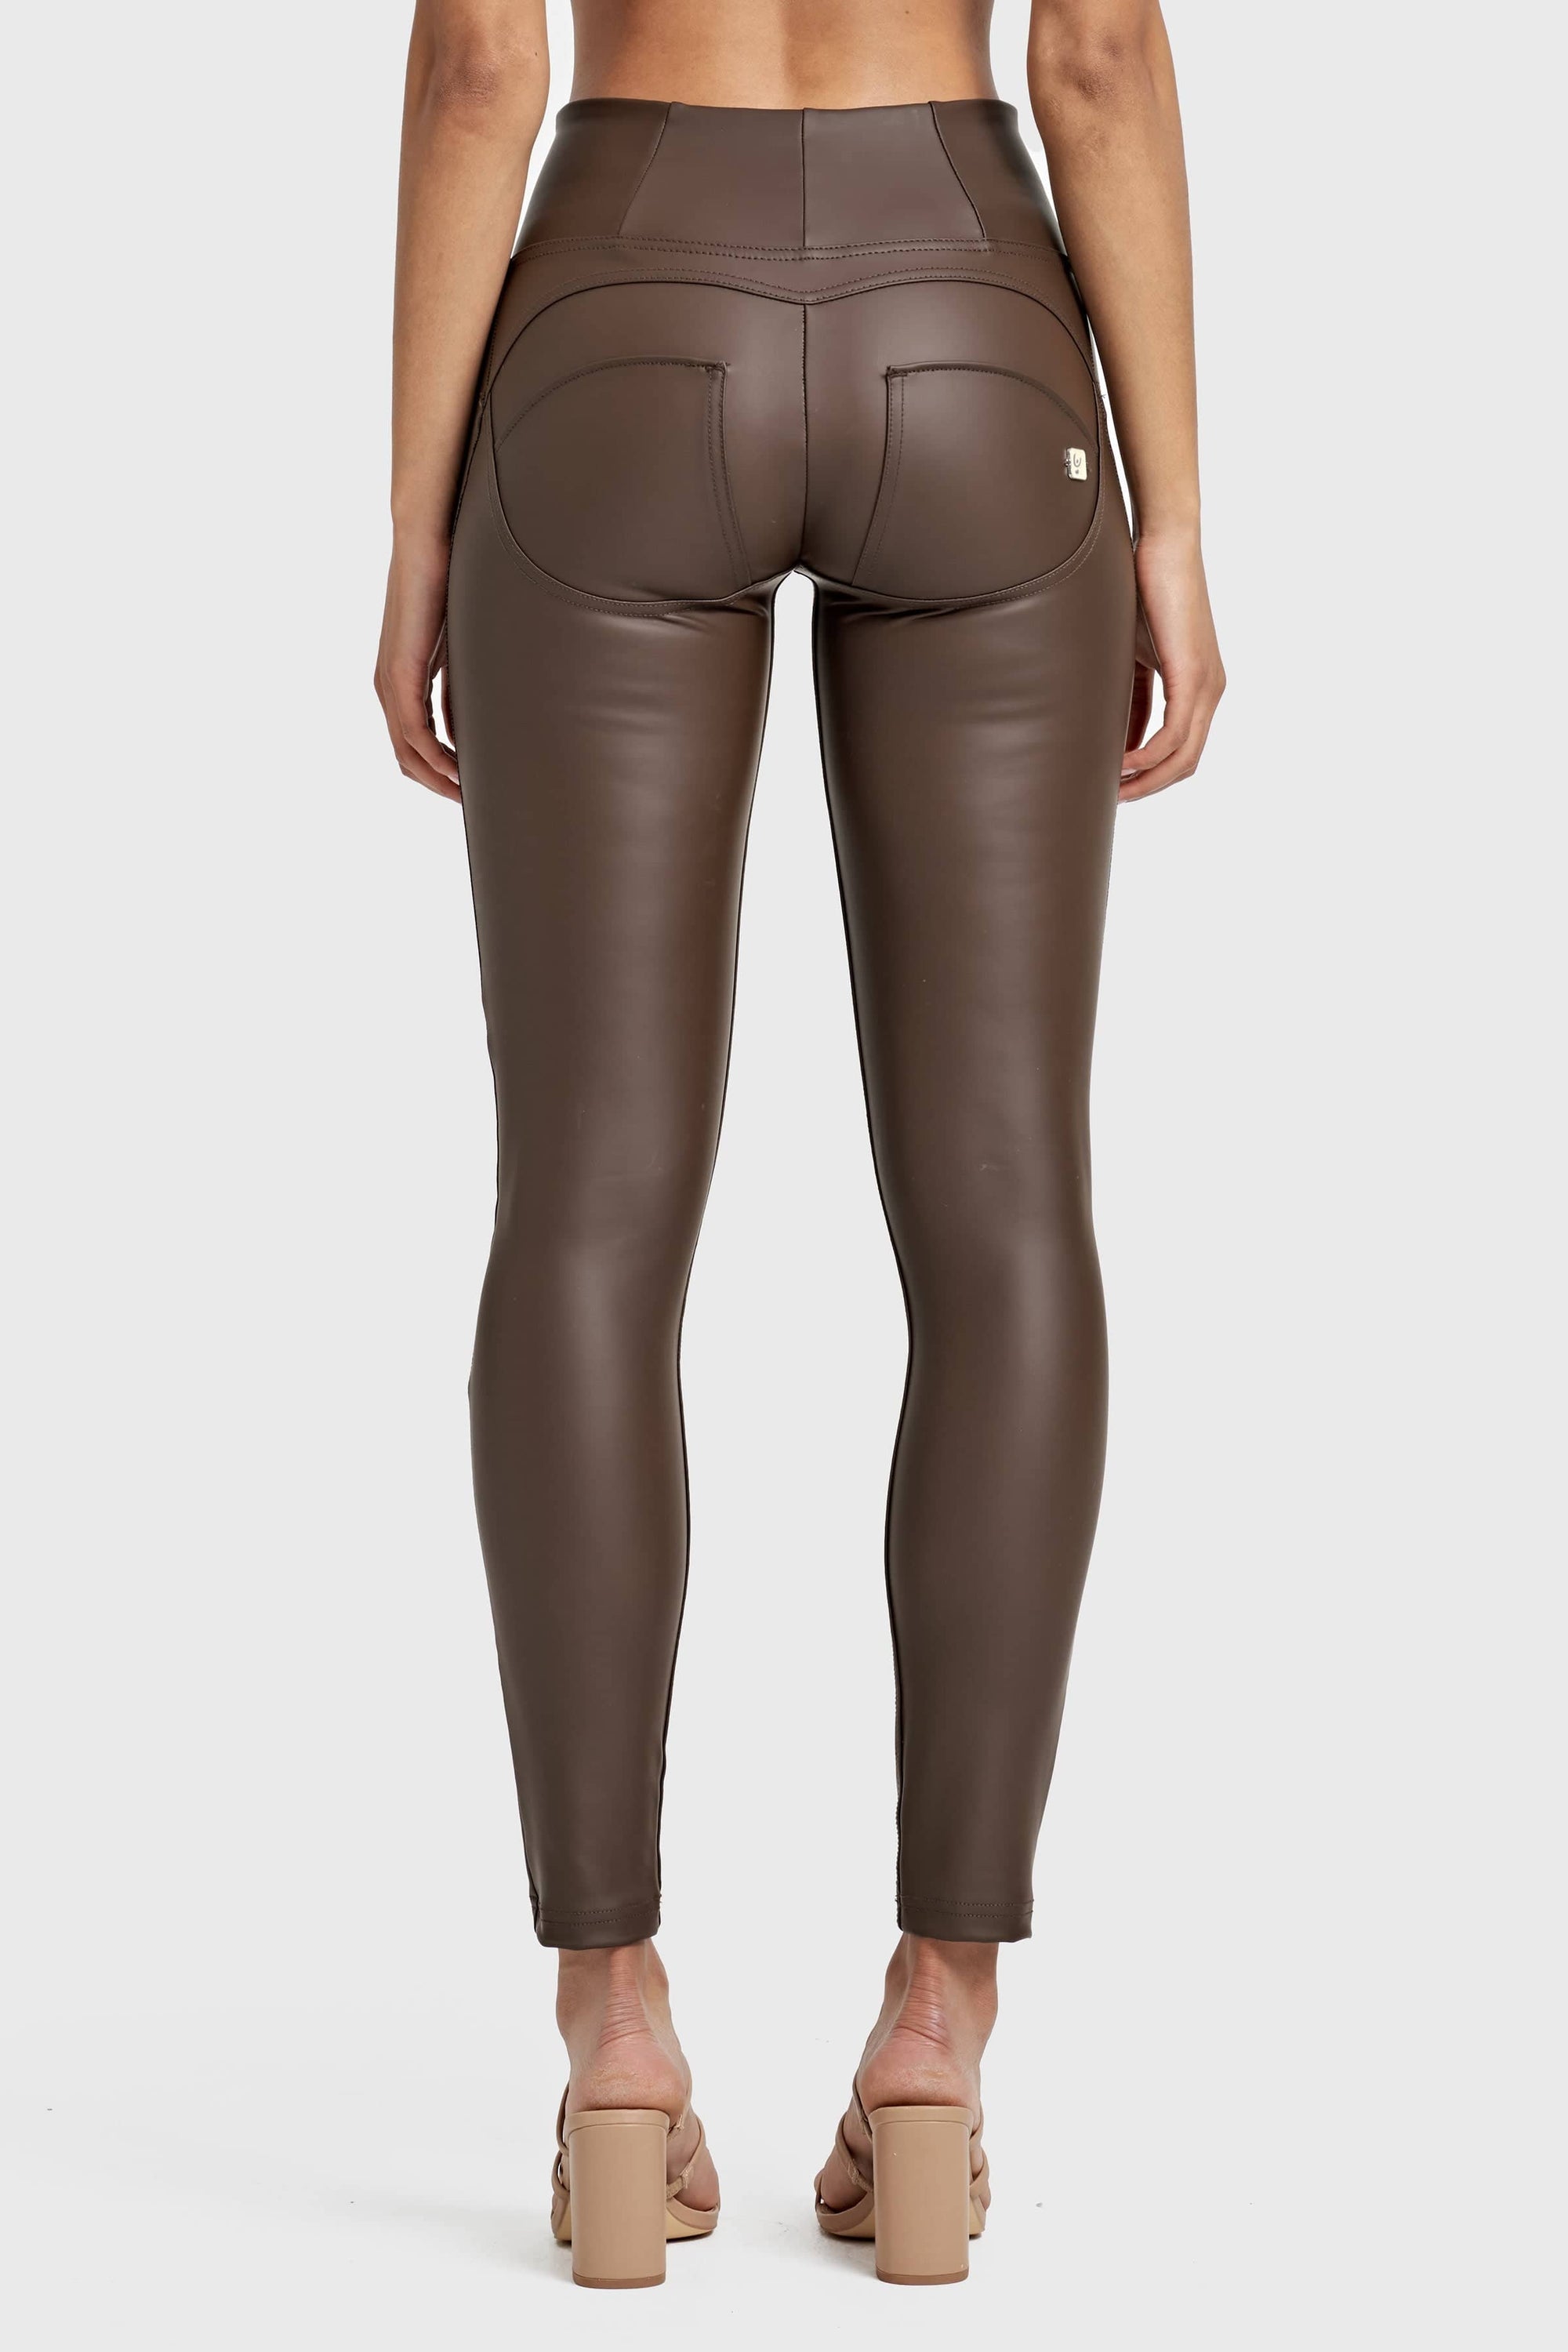 WR.UP® Faux Leather - High Waisted - Full Length - Chocolate 8